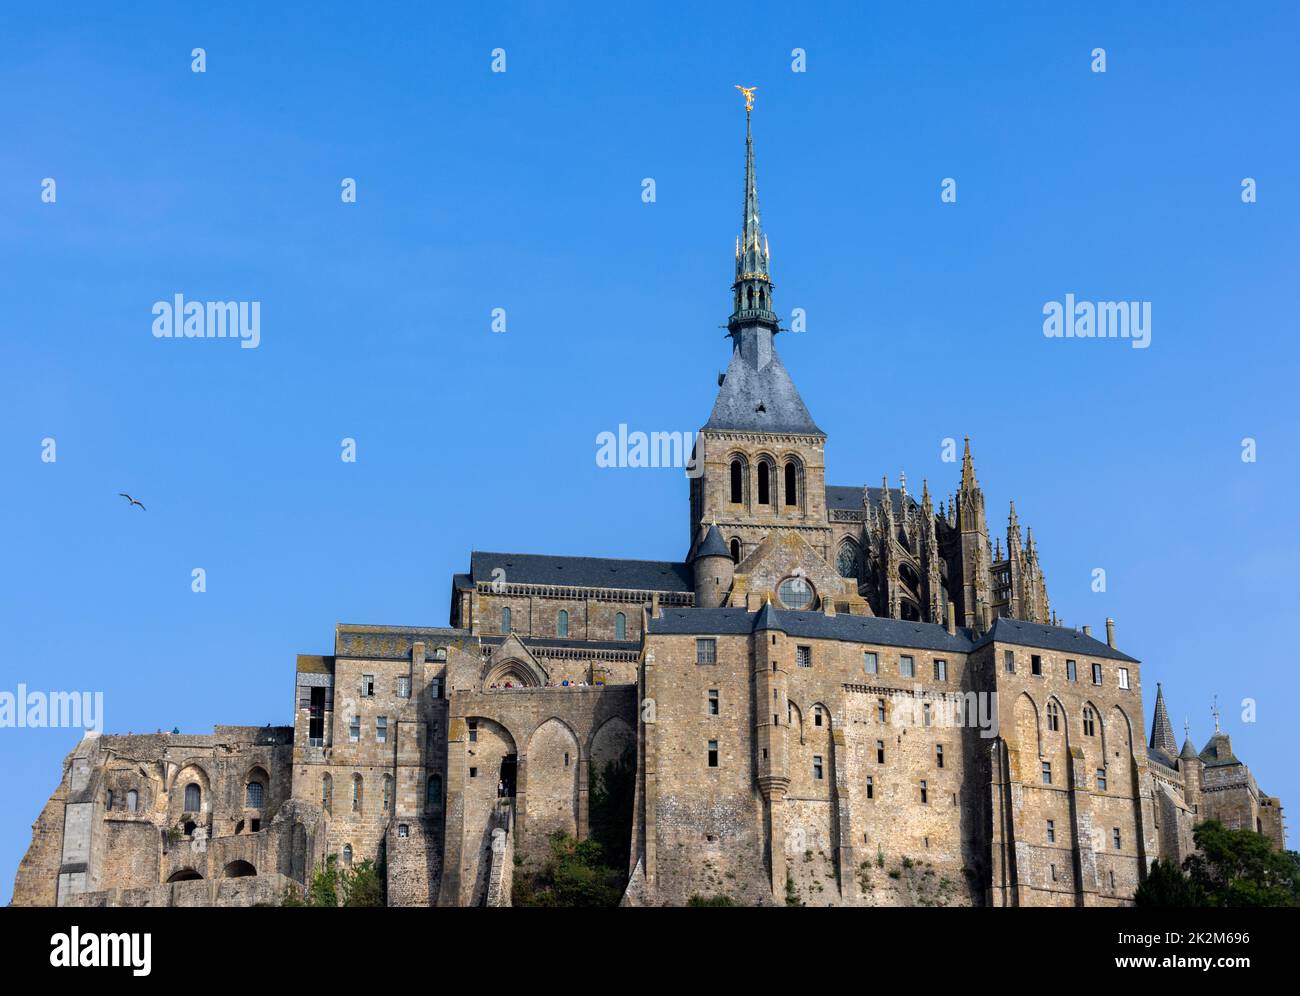 Le Mont Saint-Michel (Saint Michael's Mount), a small, rocky tidal island, famous for its medieval abbey, Avranches, Normandy, France. Stock Photo